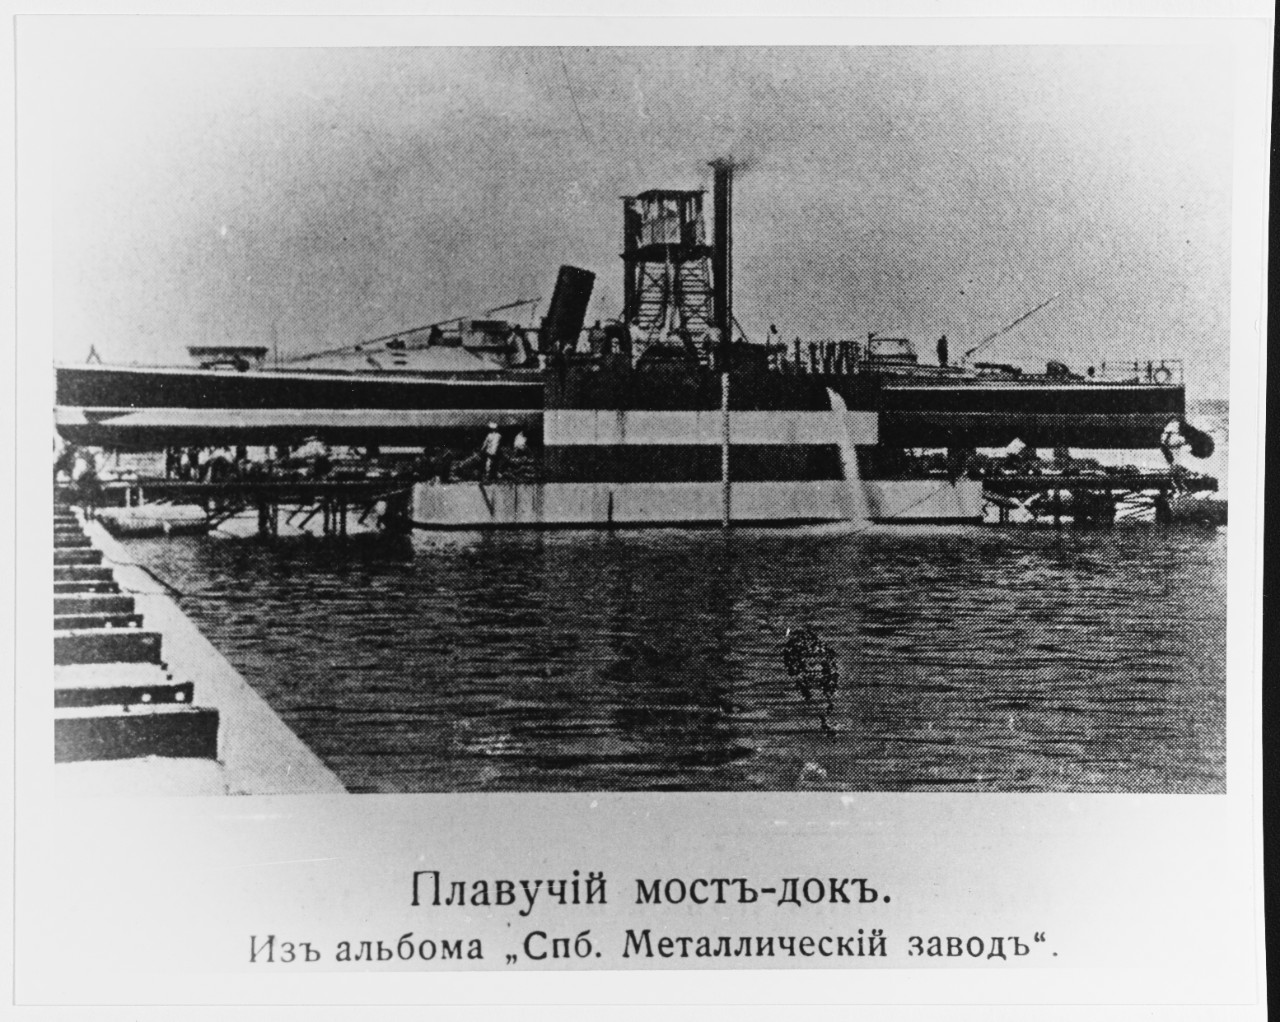 A Russian torpedo boat in a floating drydock at the St. Petersburg Metallic Works at about the turn of the century